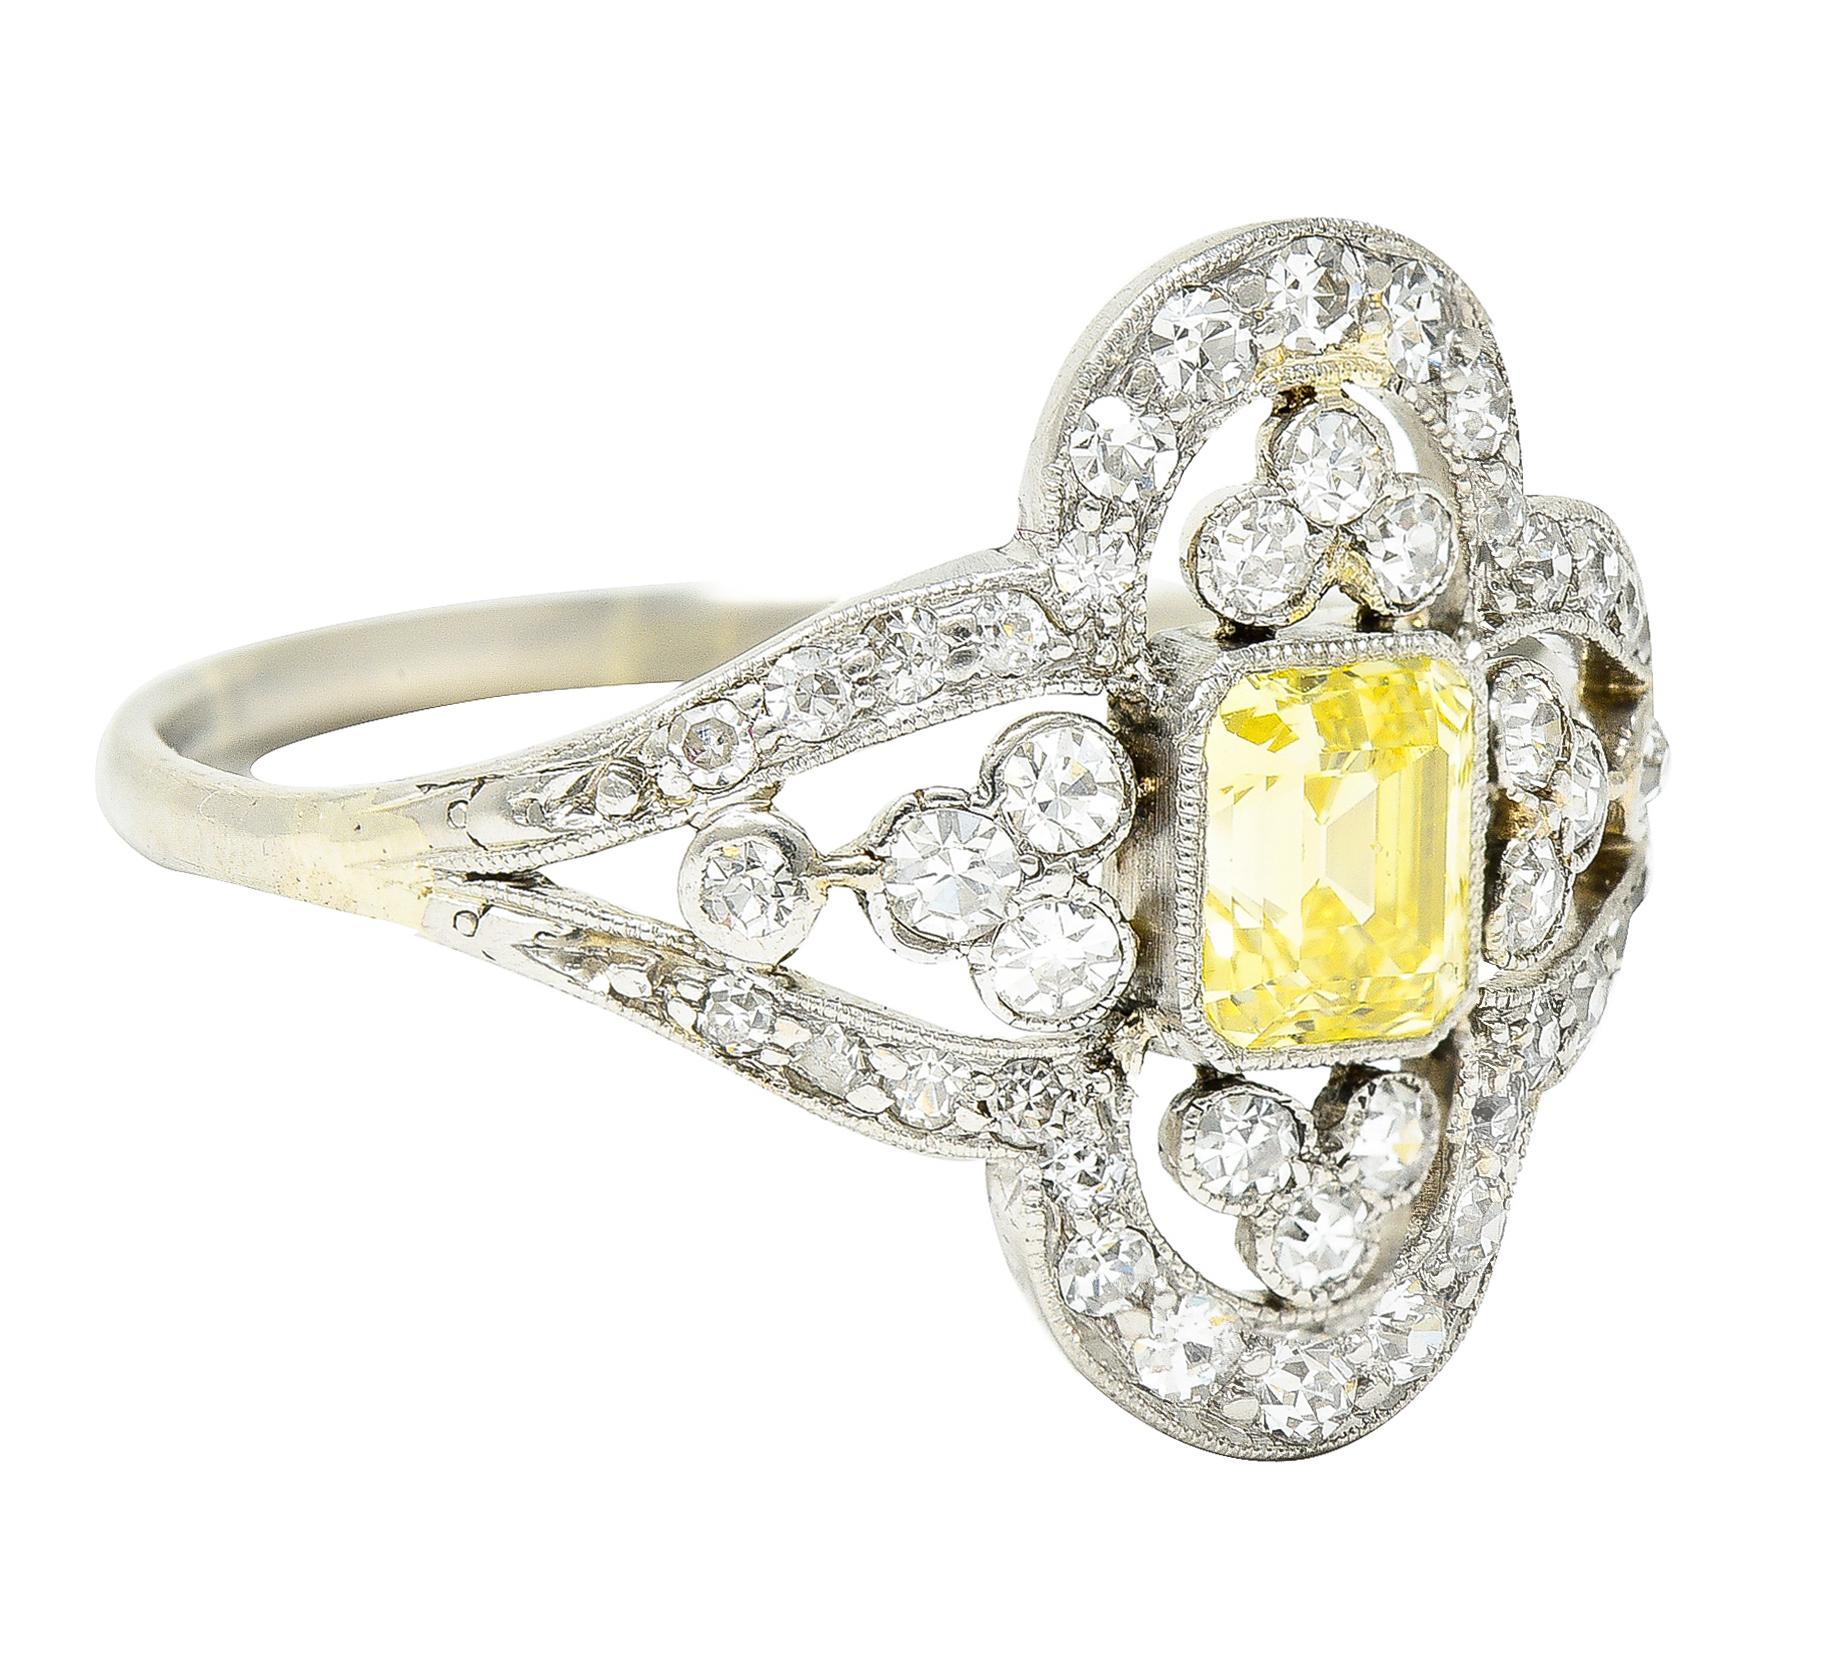 Centering an emerald cut diamond weighing approximately 0.62 carat total. Fancy light yellow in color with I1 clarity - bezel set with milgrain surround. Centered in a pierced quatrefoil motif with trefoil clusters at cardinal points. Featuring